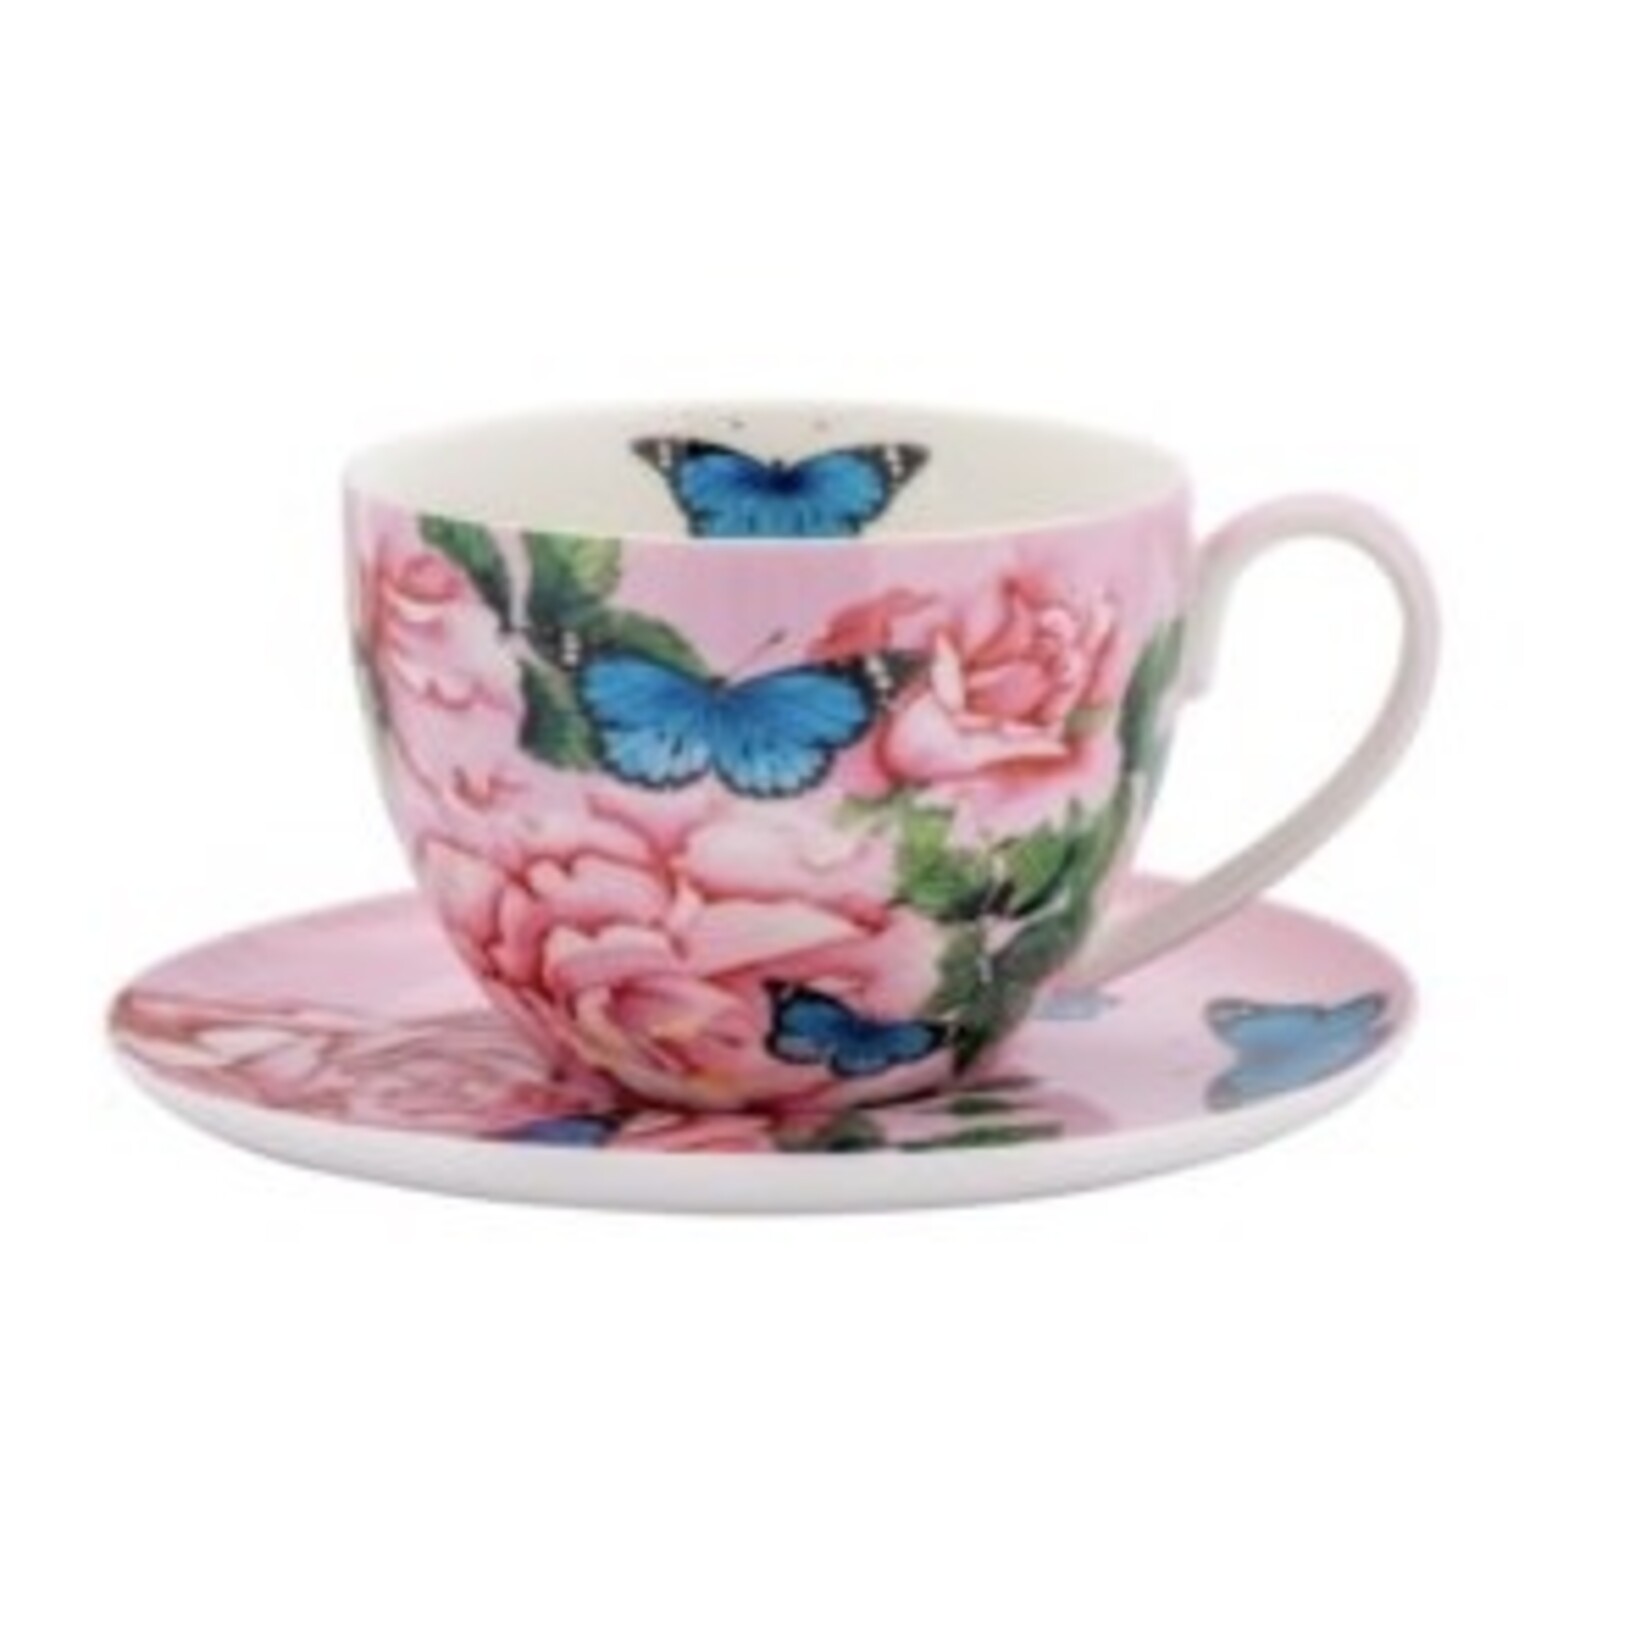 MAXWELL WILLIAMS MAXWELL WILLIAMS Cup & Saucer - Posey Rose